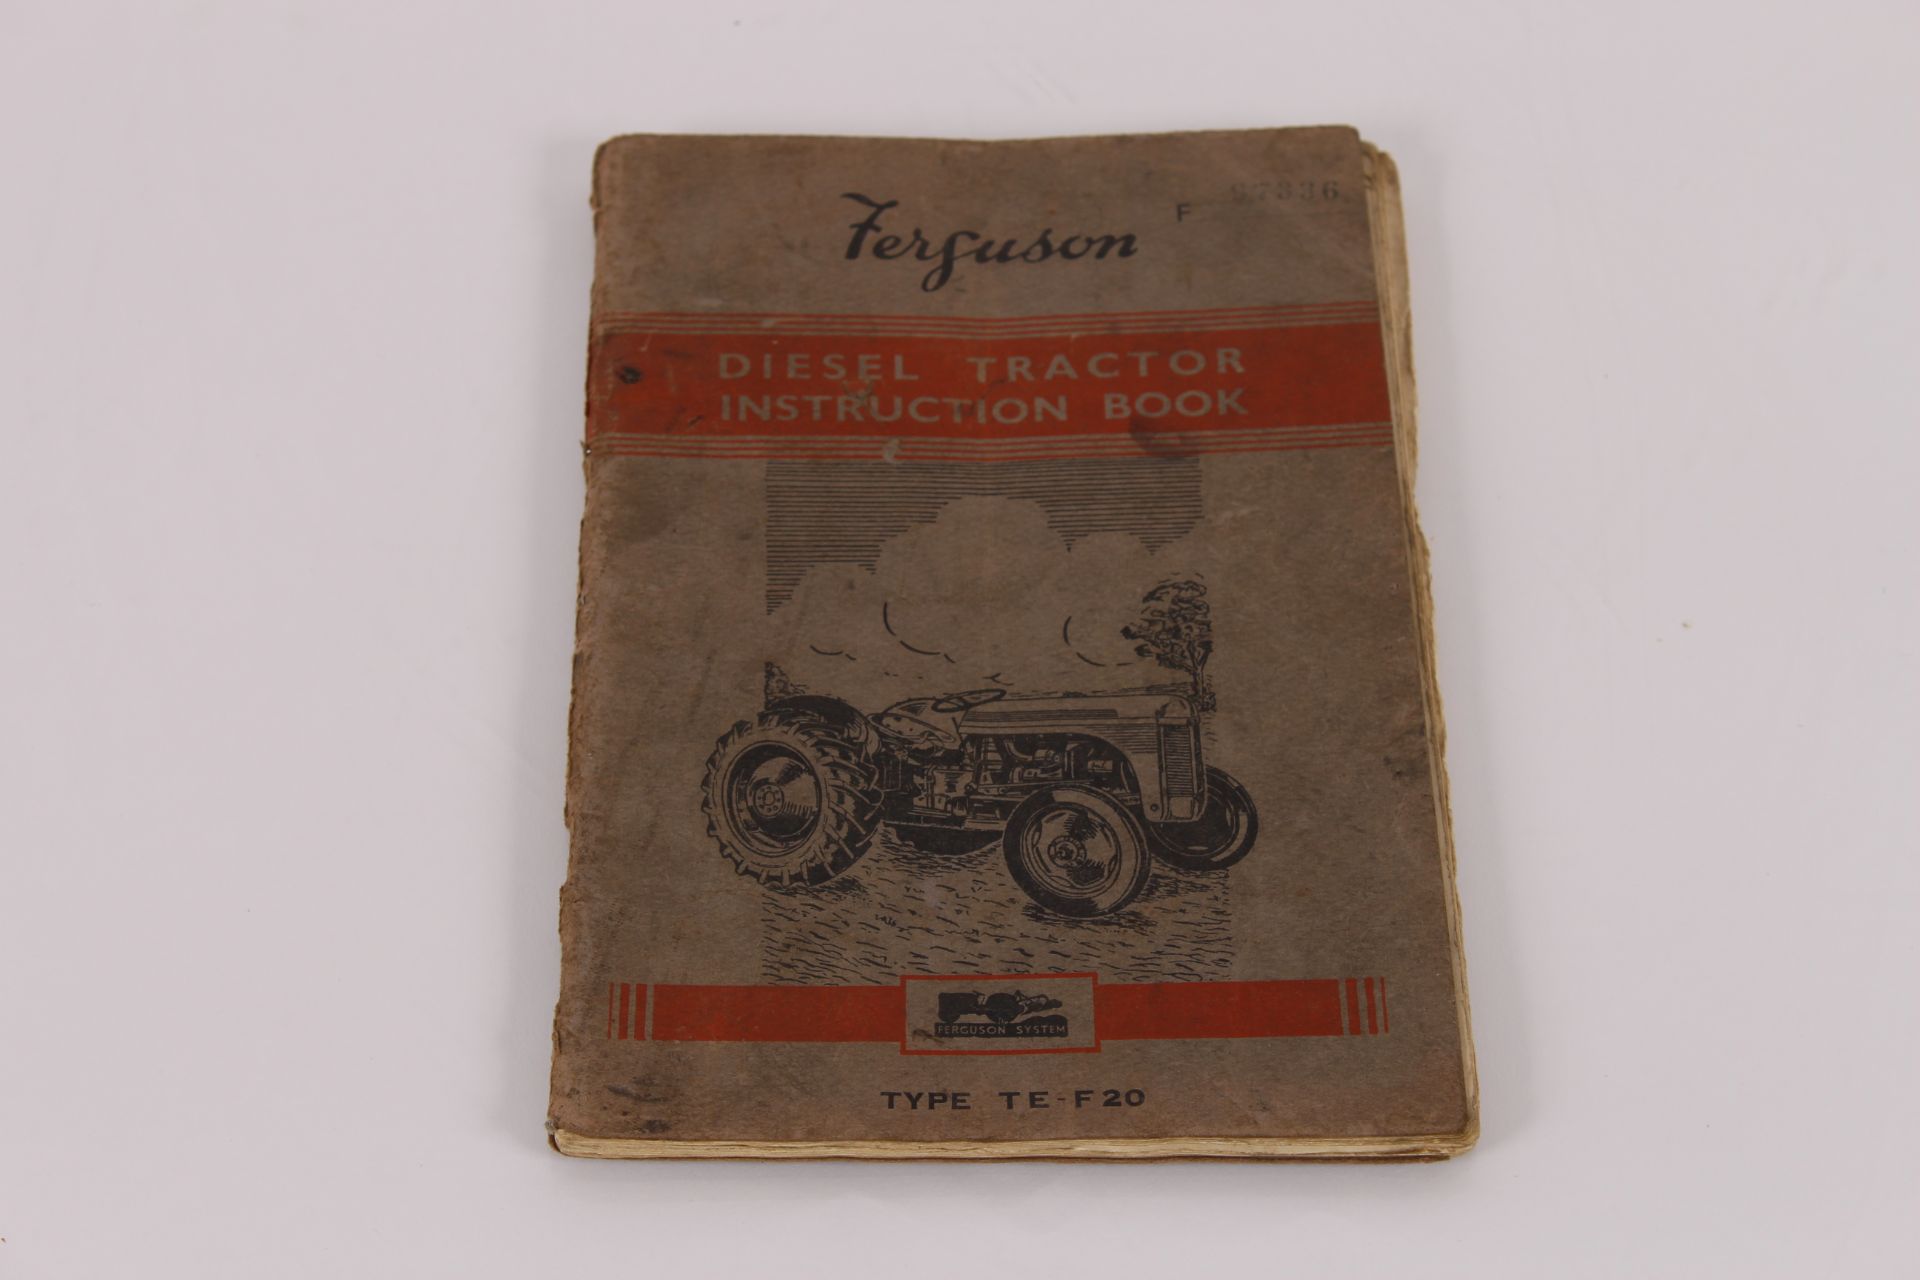 3X Ferguson tractor instruction books: Diesel, Carburettor and 35. Together with a Silsoe report - Image 2 of 5